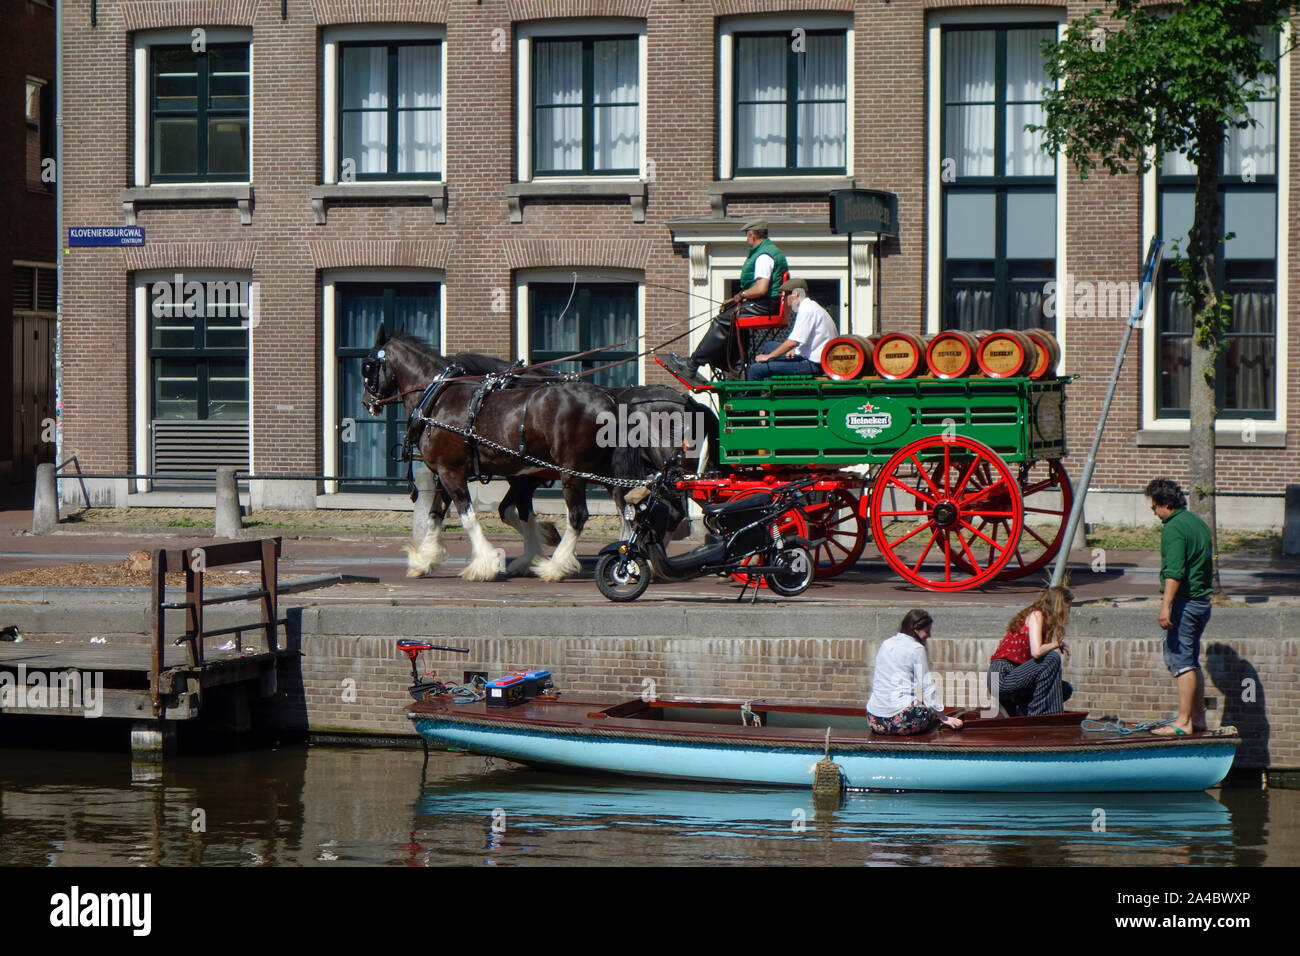 Heineken horse drawn Beer Wagon making deliveries in Amsterdam, The Netherlands. Stock Photo